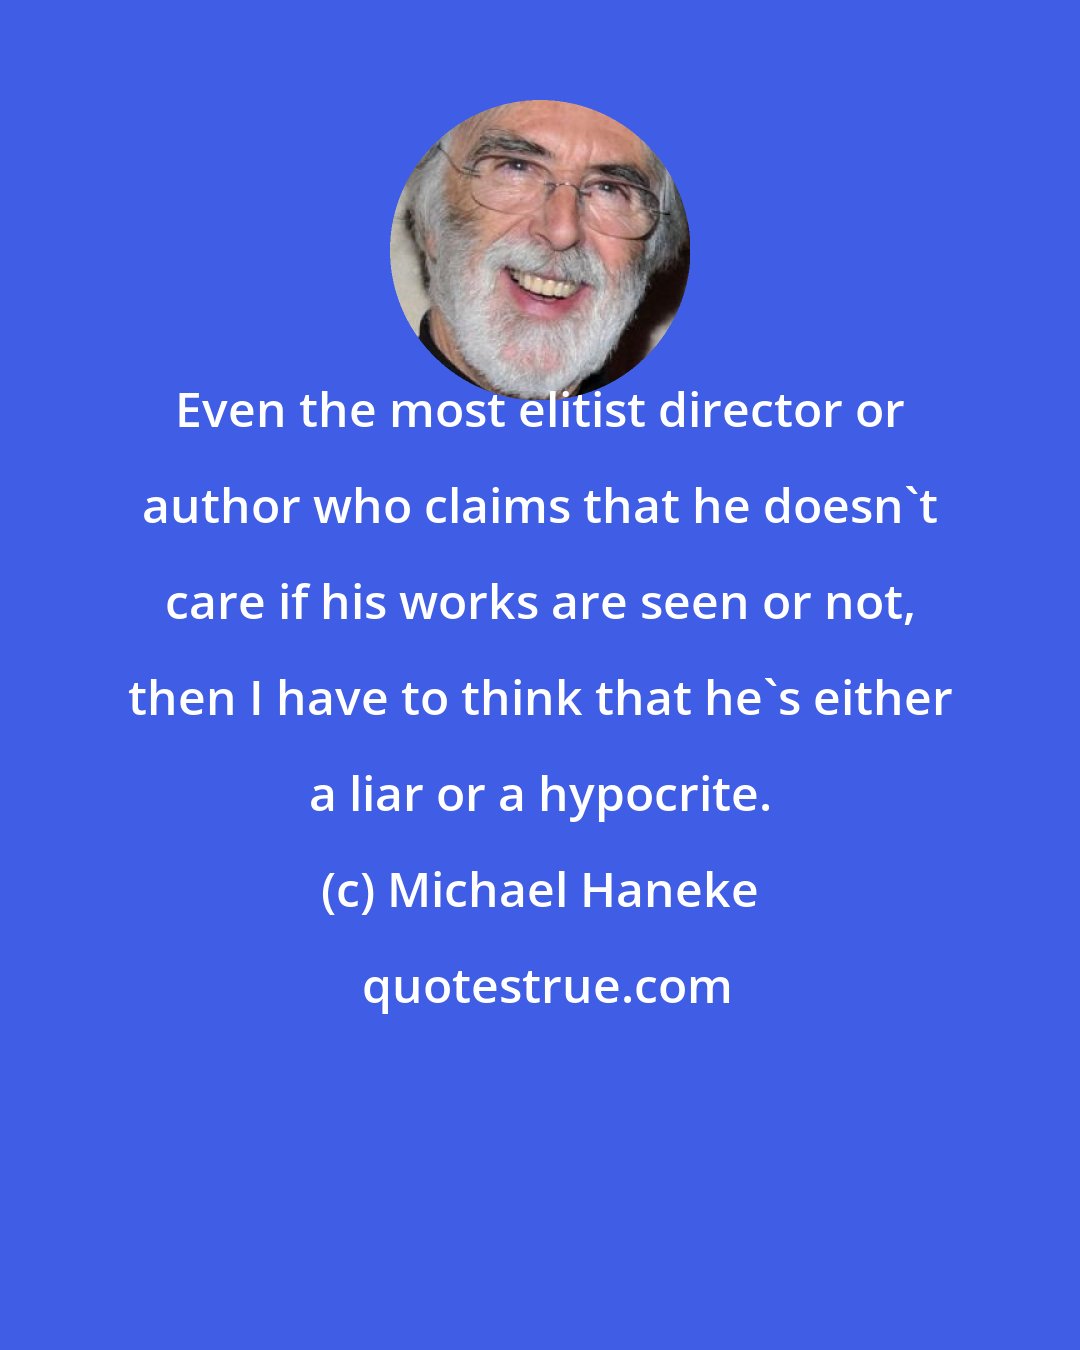 Michael Haneke: Even the most elitist director or author who claims that he doesn't care if his works are seen or not, then I have to think that he's either a liar or a hypocrite.